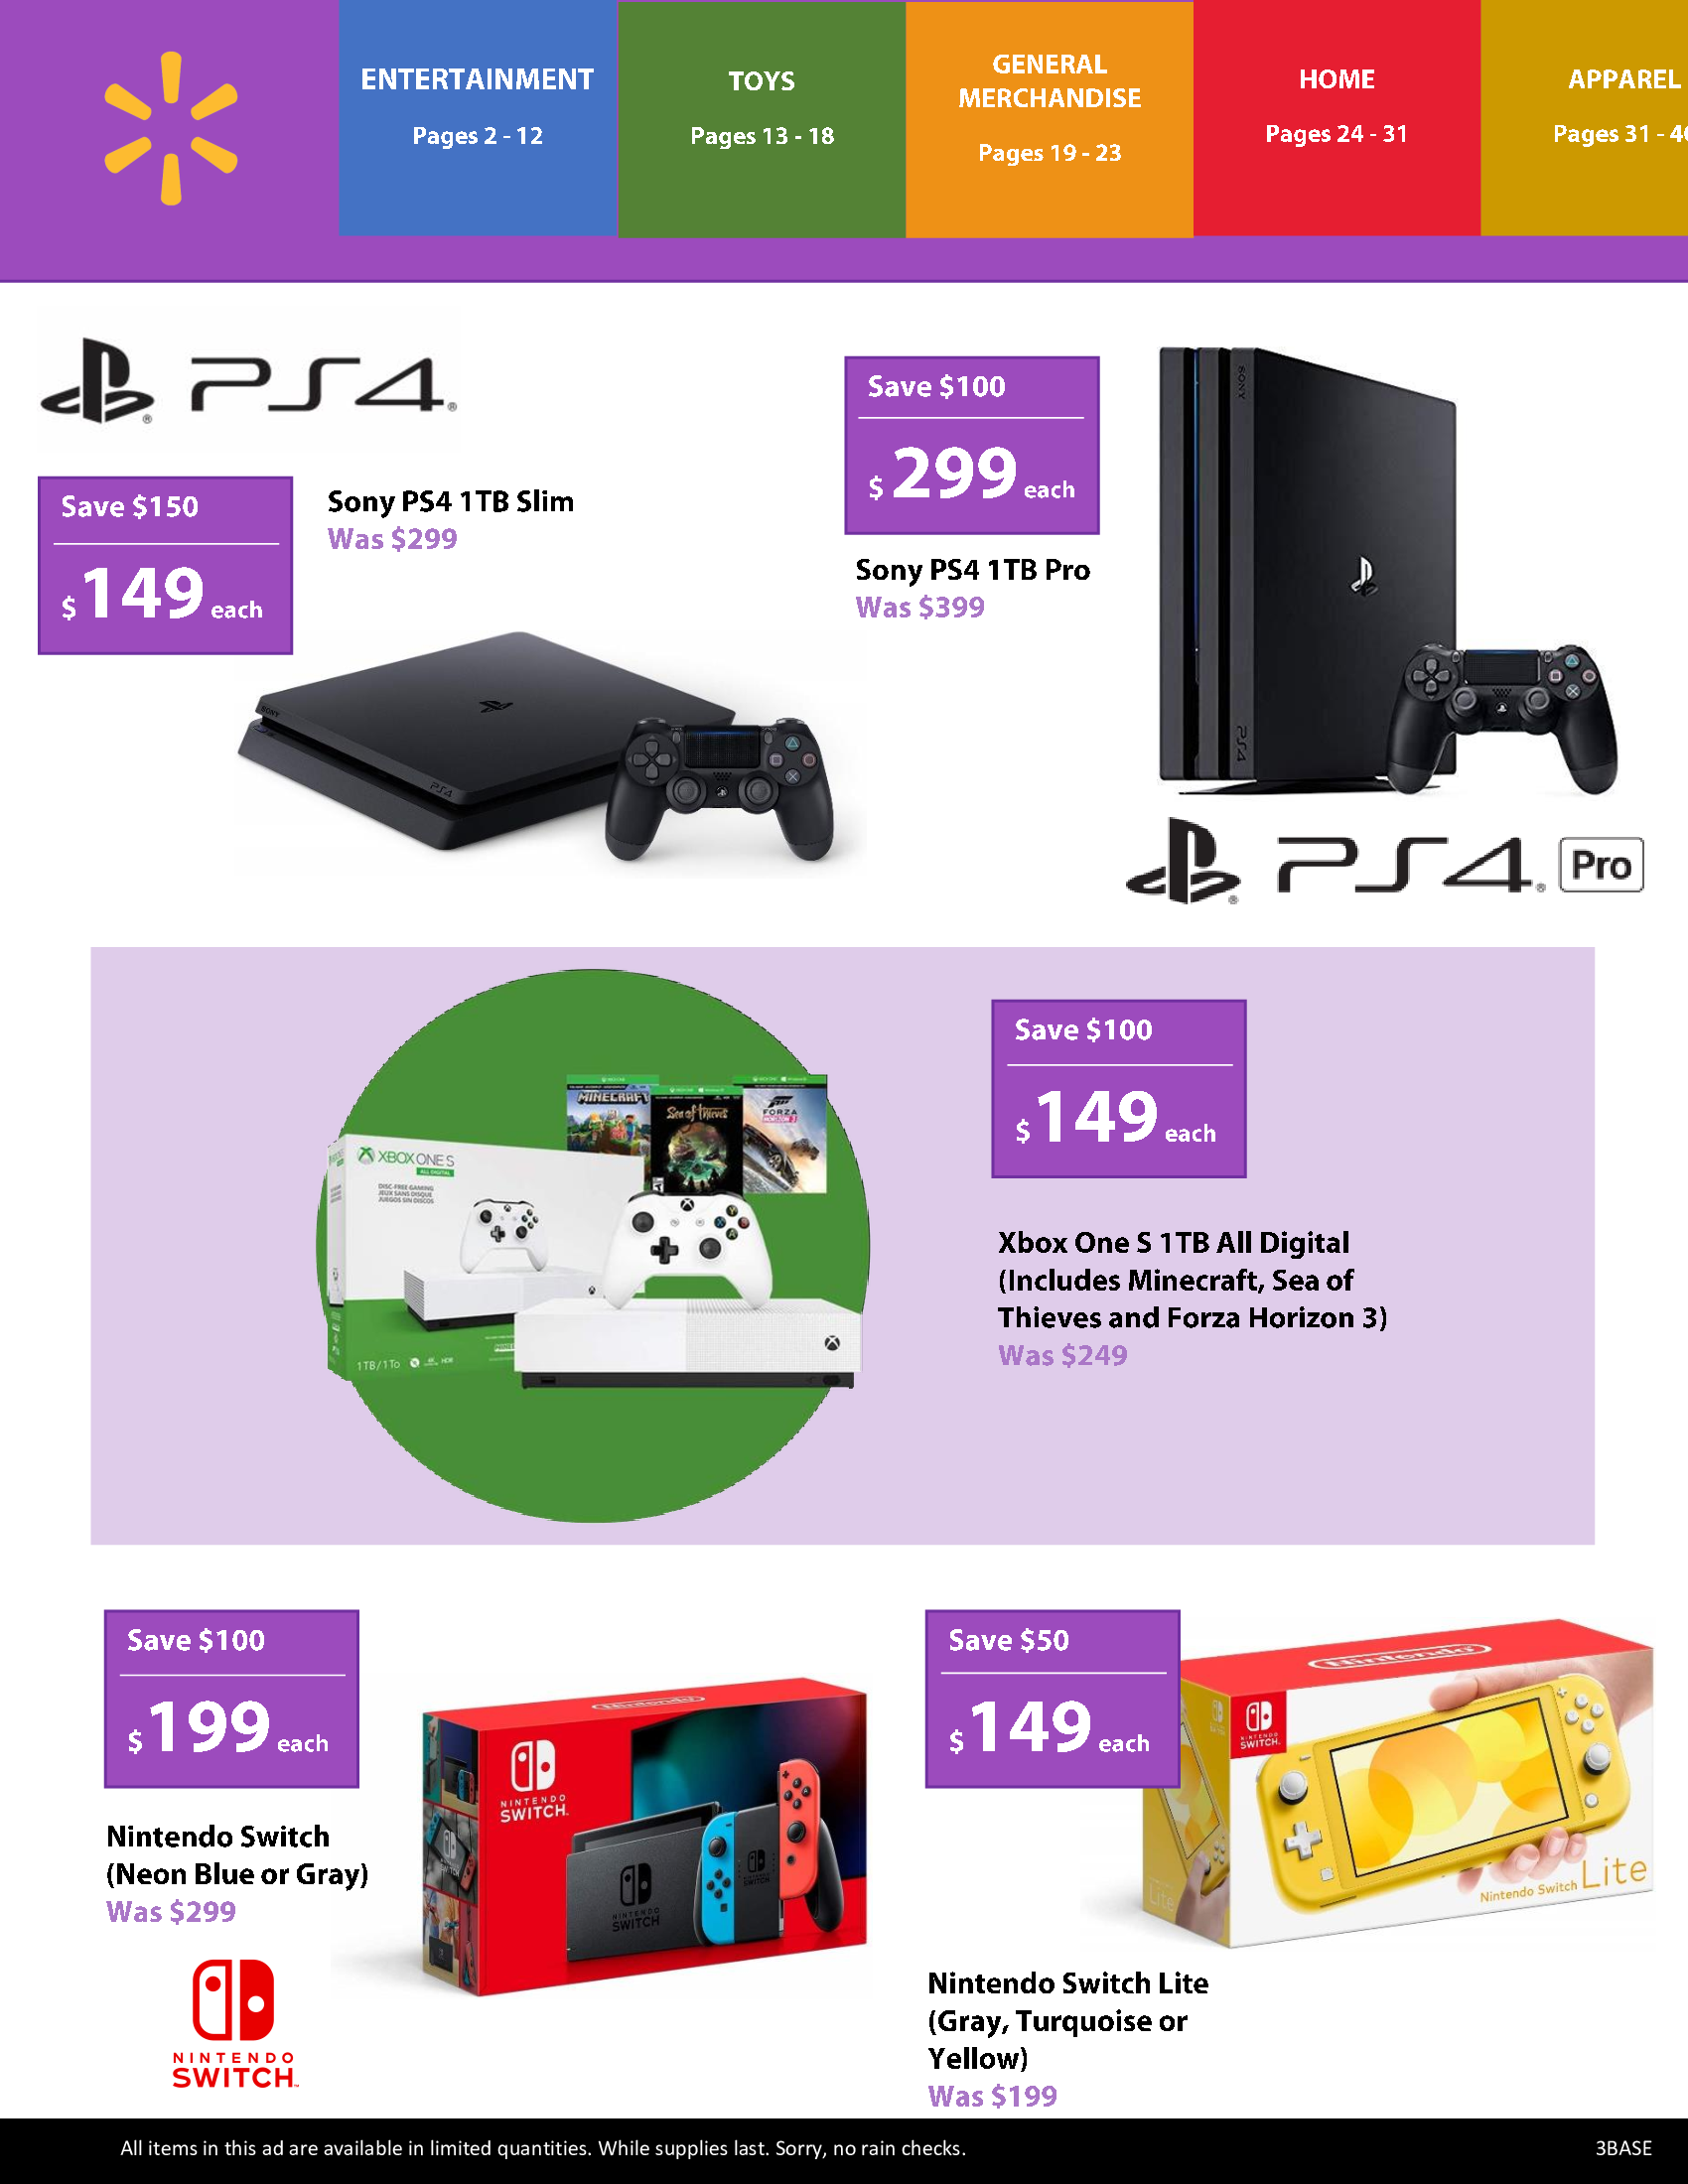 Ps4 To Price Drop To 150 For Black Friday Deal Cheapest So Far